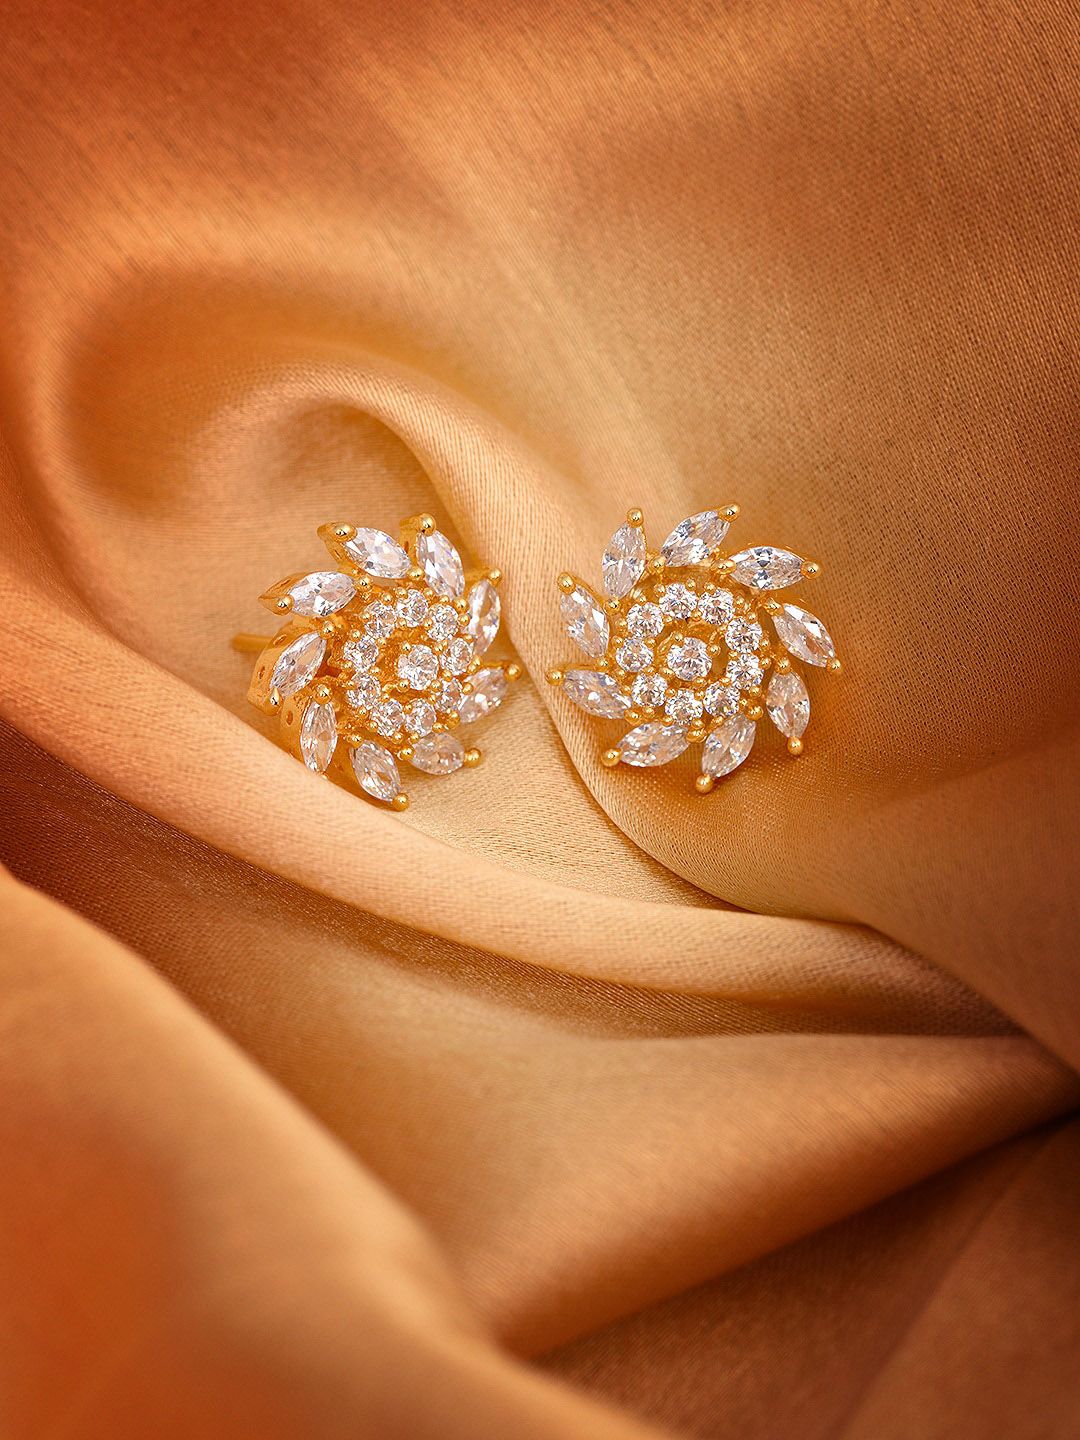 Saraf RS Jewellery White Contemporary Studs Earrings Price in India